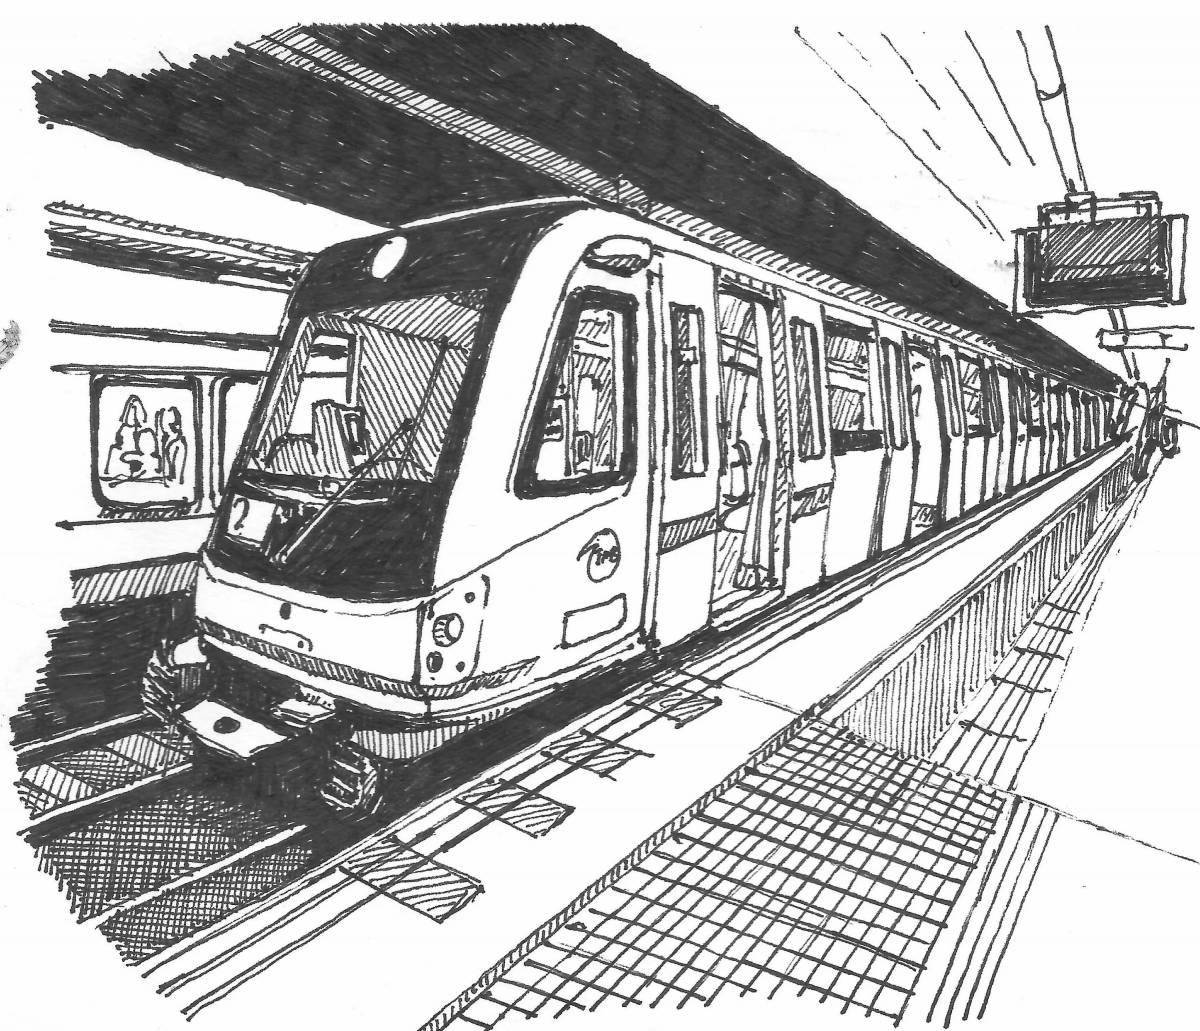 Coloring page for a spectacular Moscow metro train